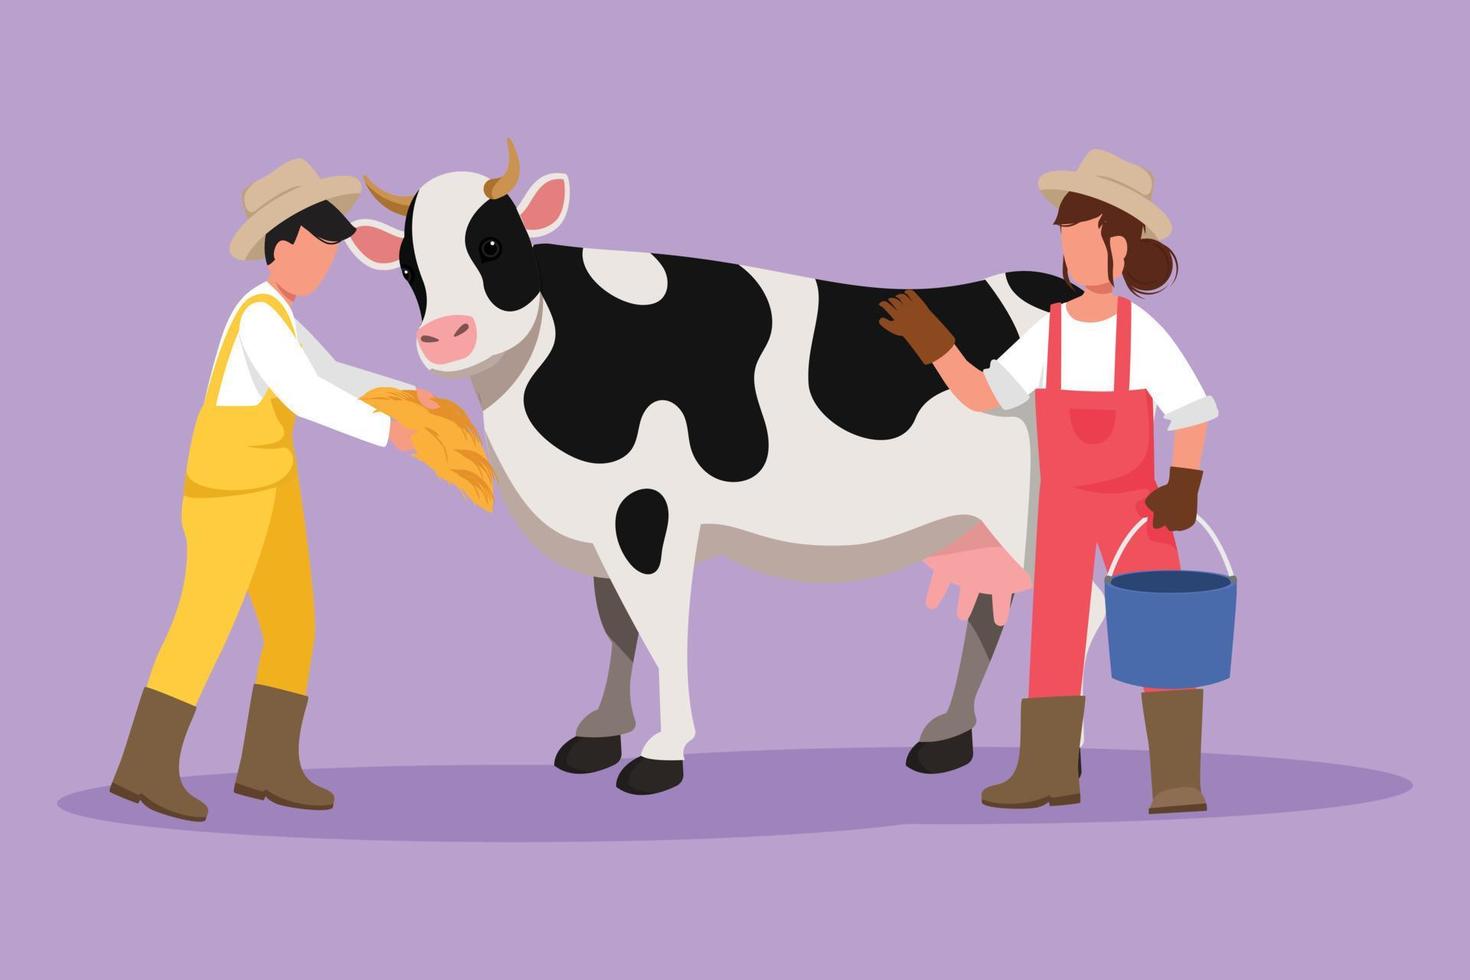 Cartoon flat style drawing female farmer standing and rubbing the cow while carrying bucket of water. Man feeding farm animal with grass or hay. Successful farming. Graphic design vector illustration